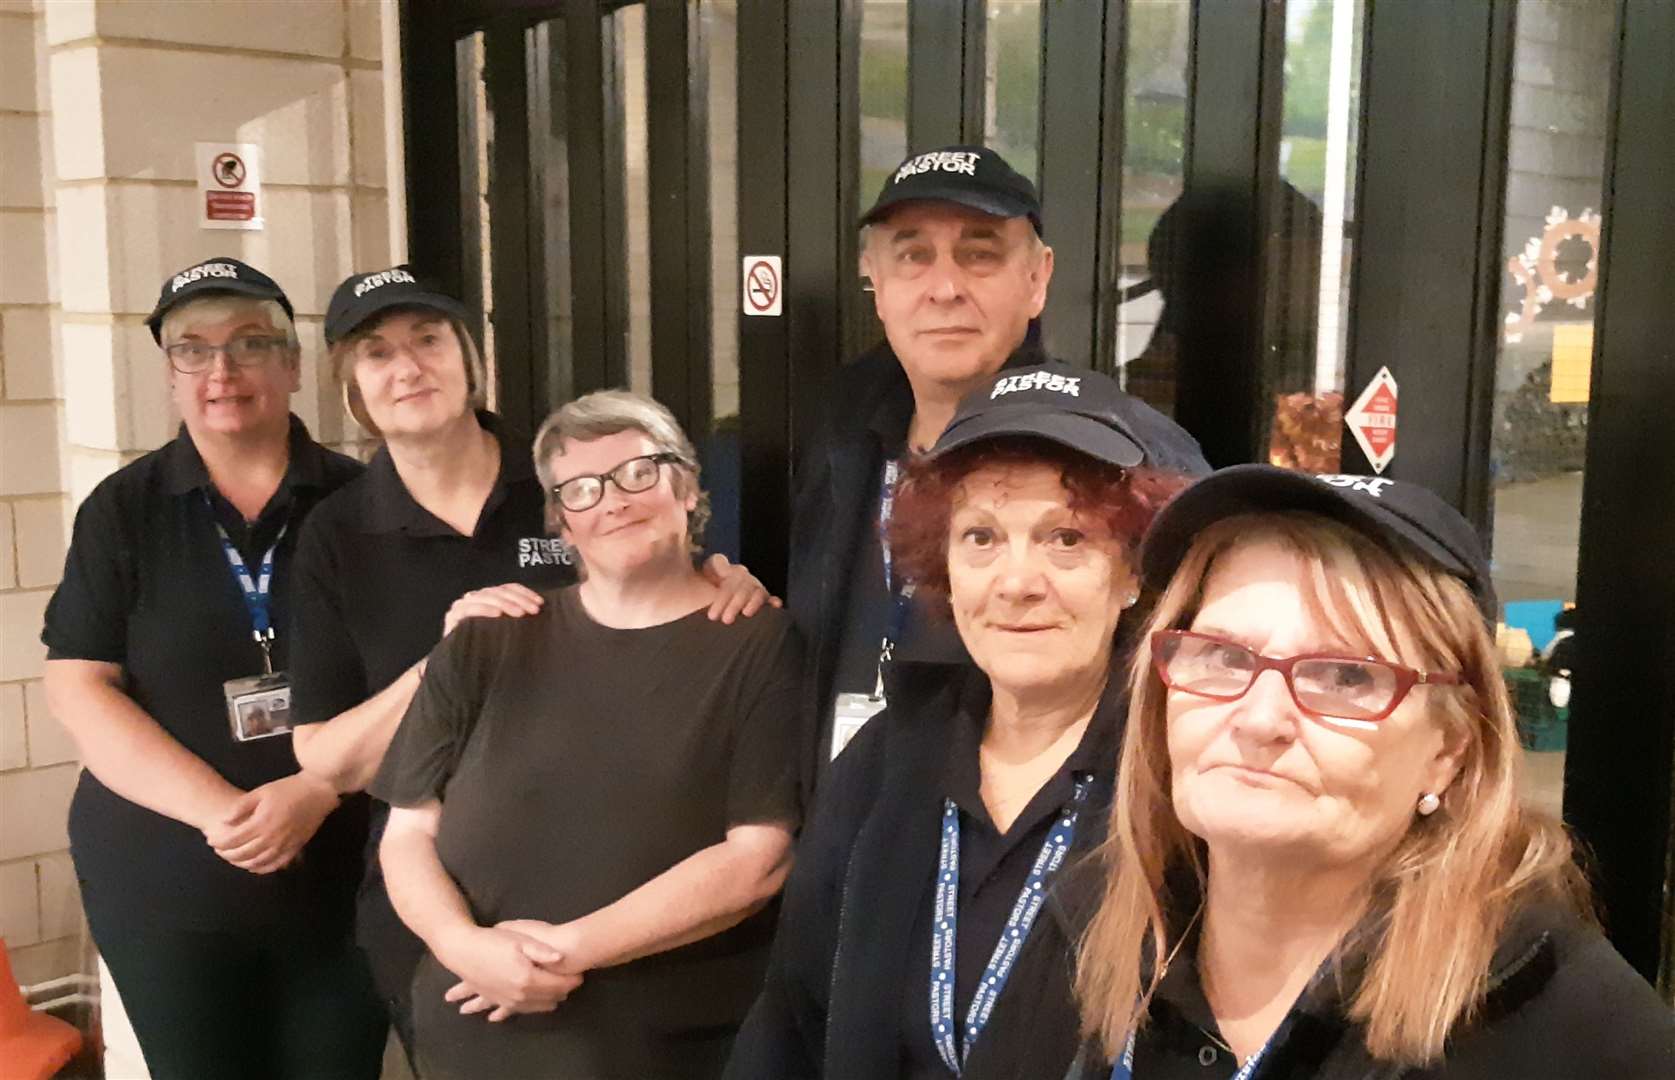 The street pastors at their Dover base. Picture: Sam Lennon